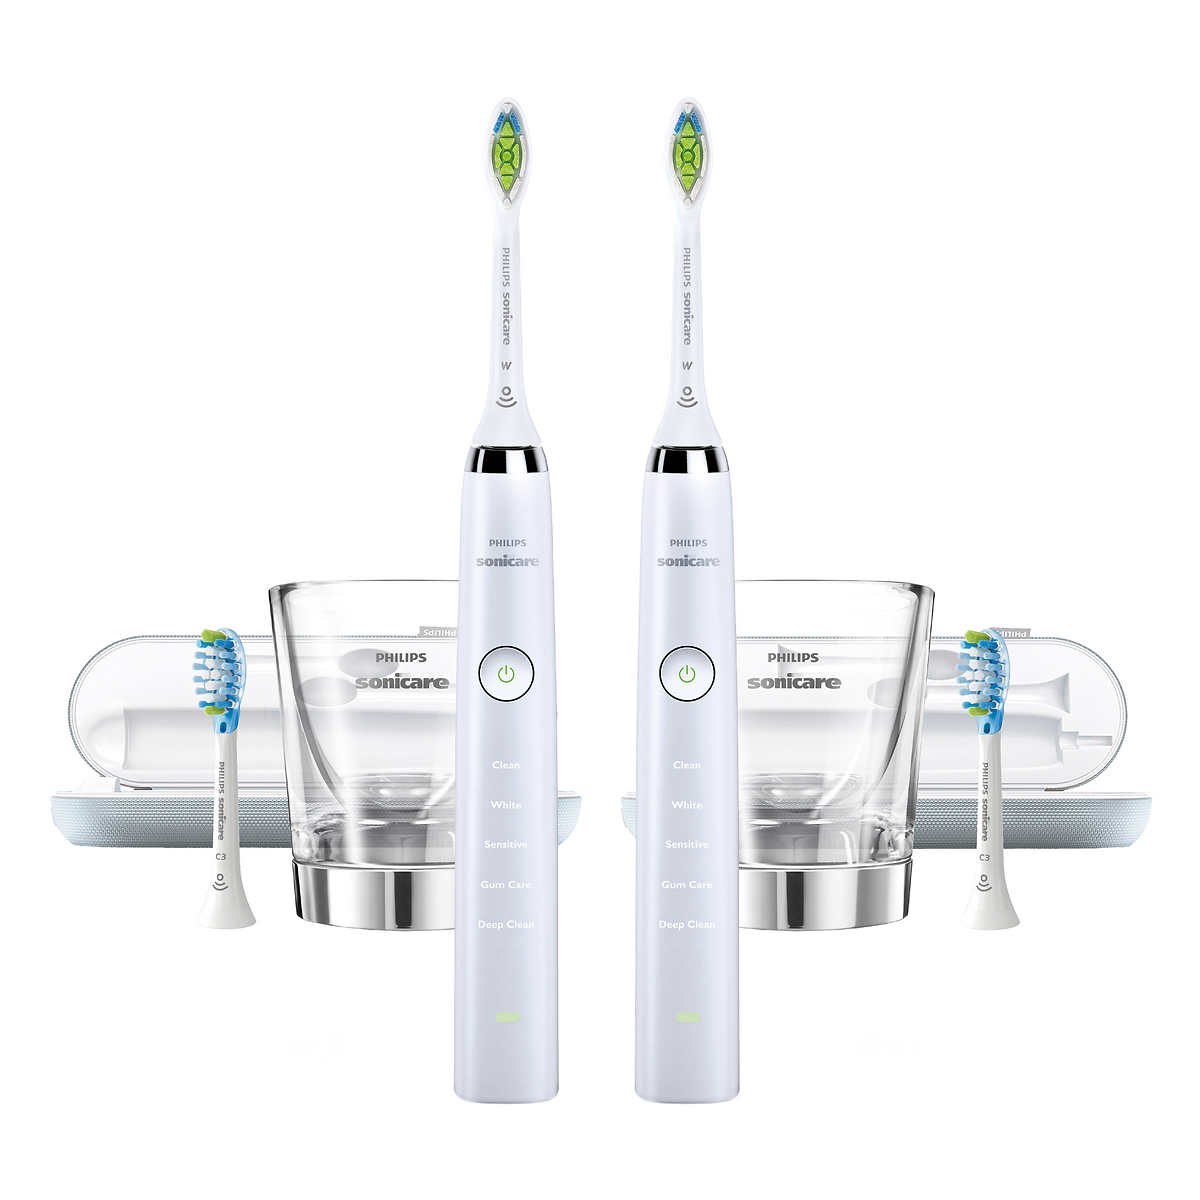 Philips Sonicare DiamondClean Electric Toothbrush 2015 model White Edition